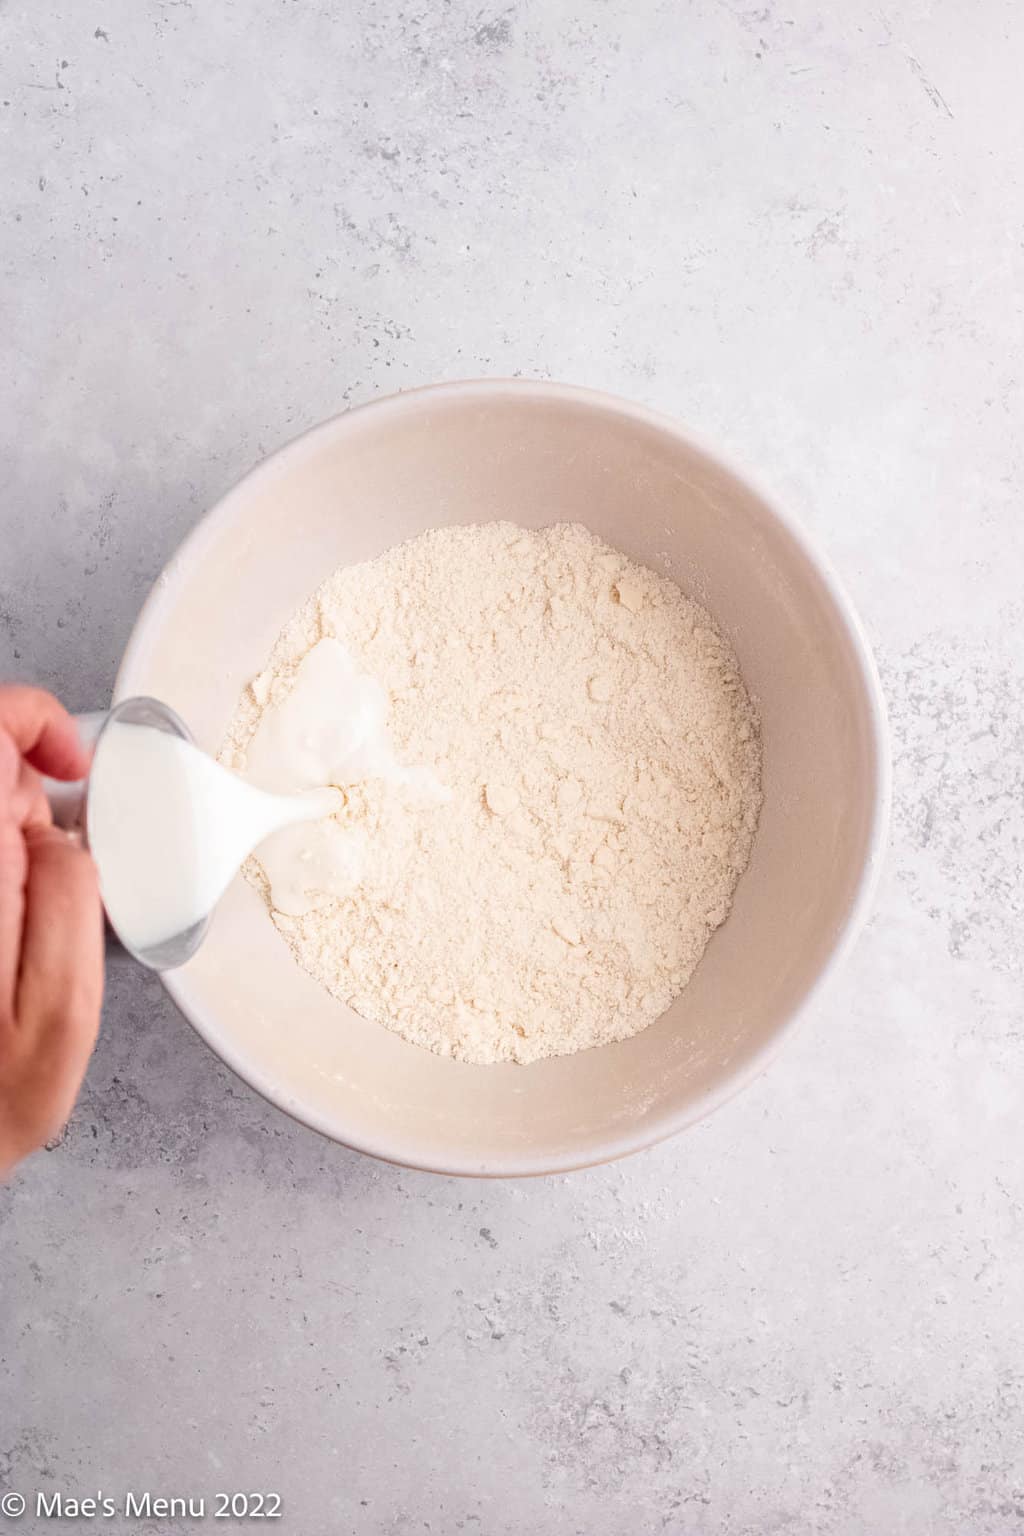 Pouring buttermilk into the buttery flour mixture.